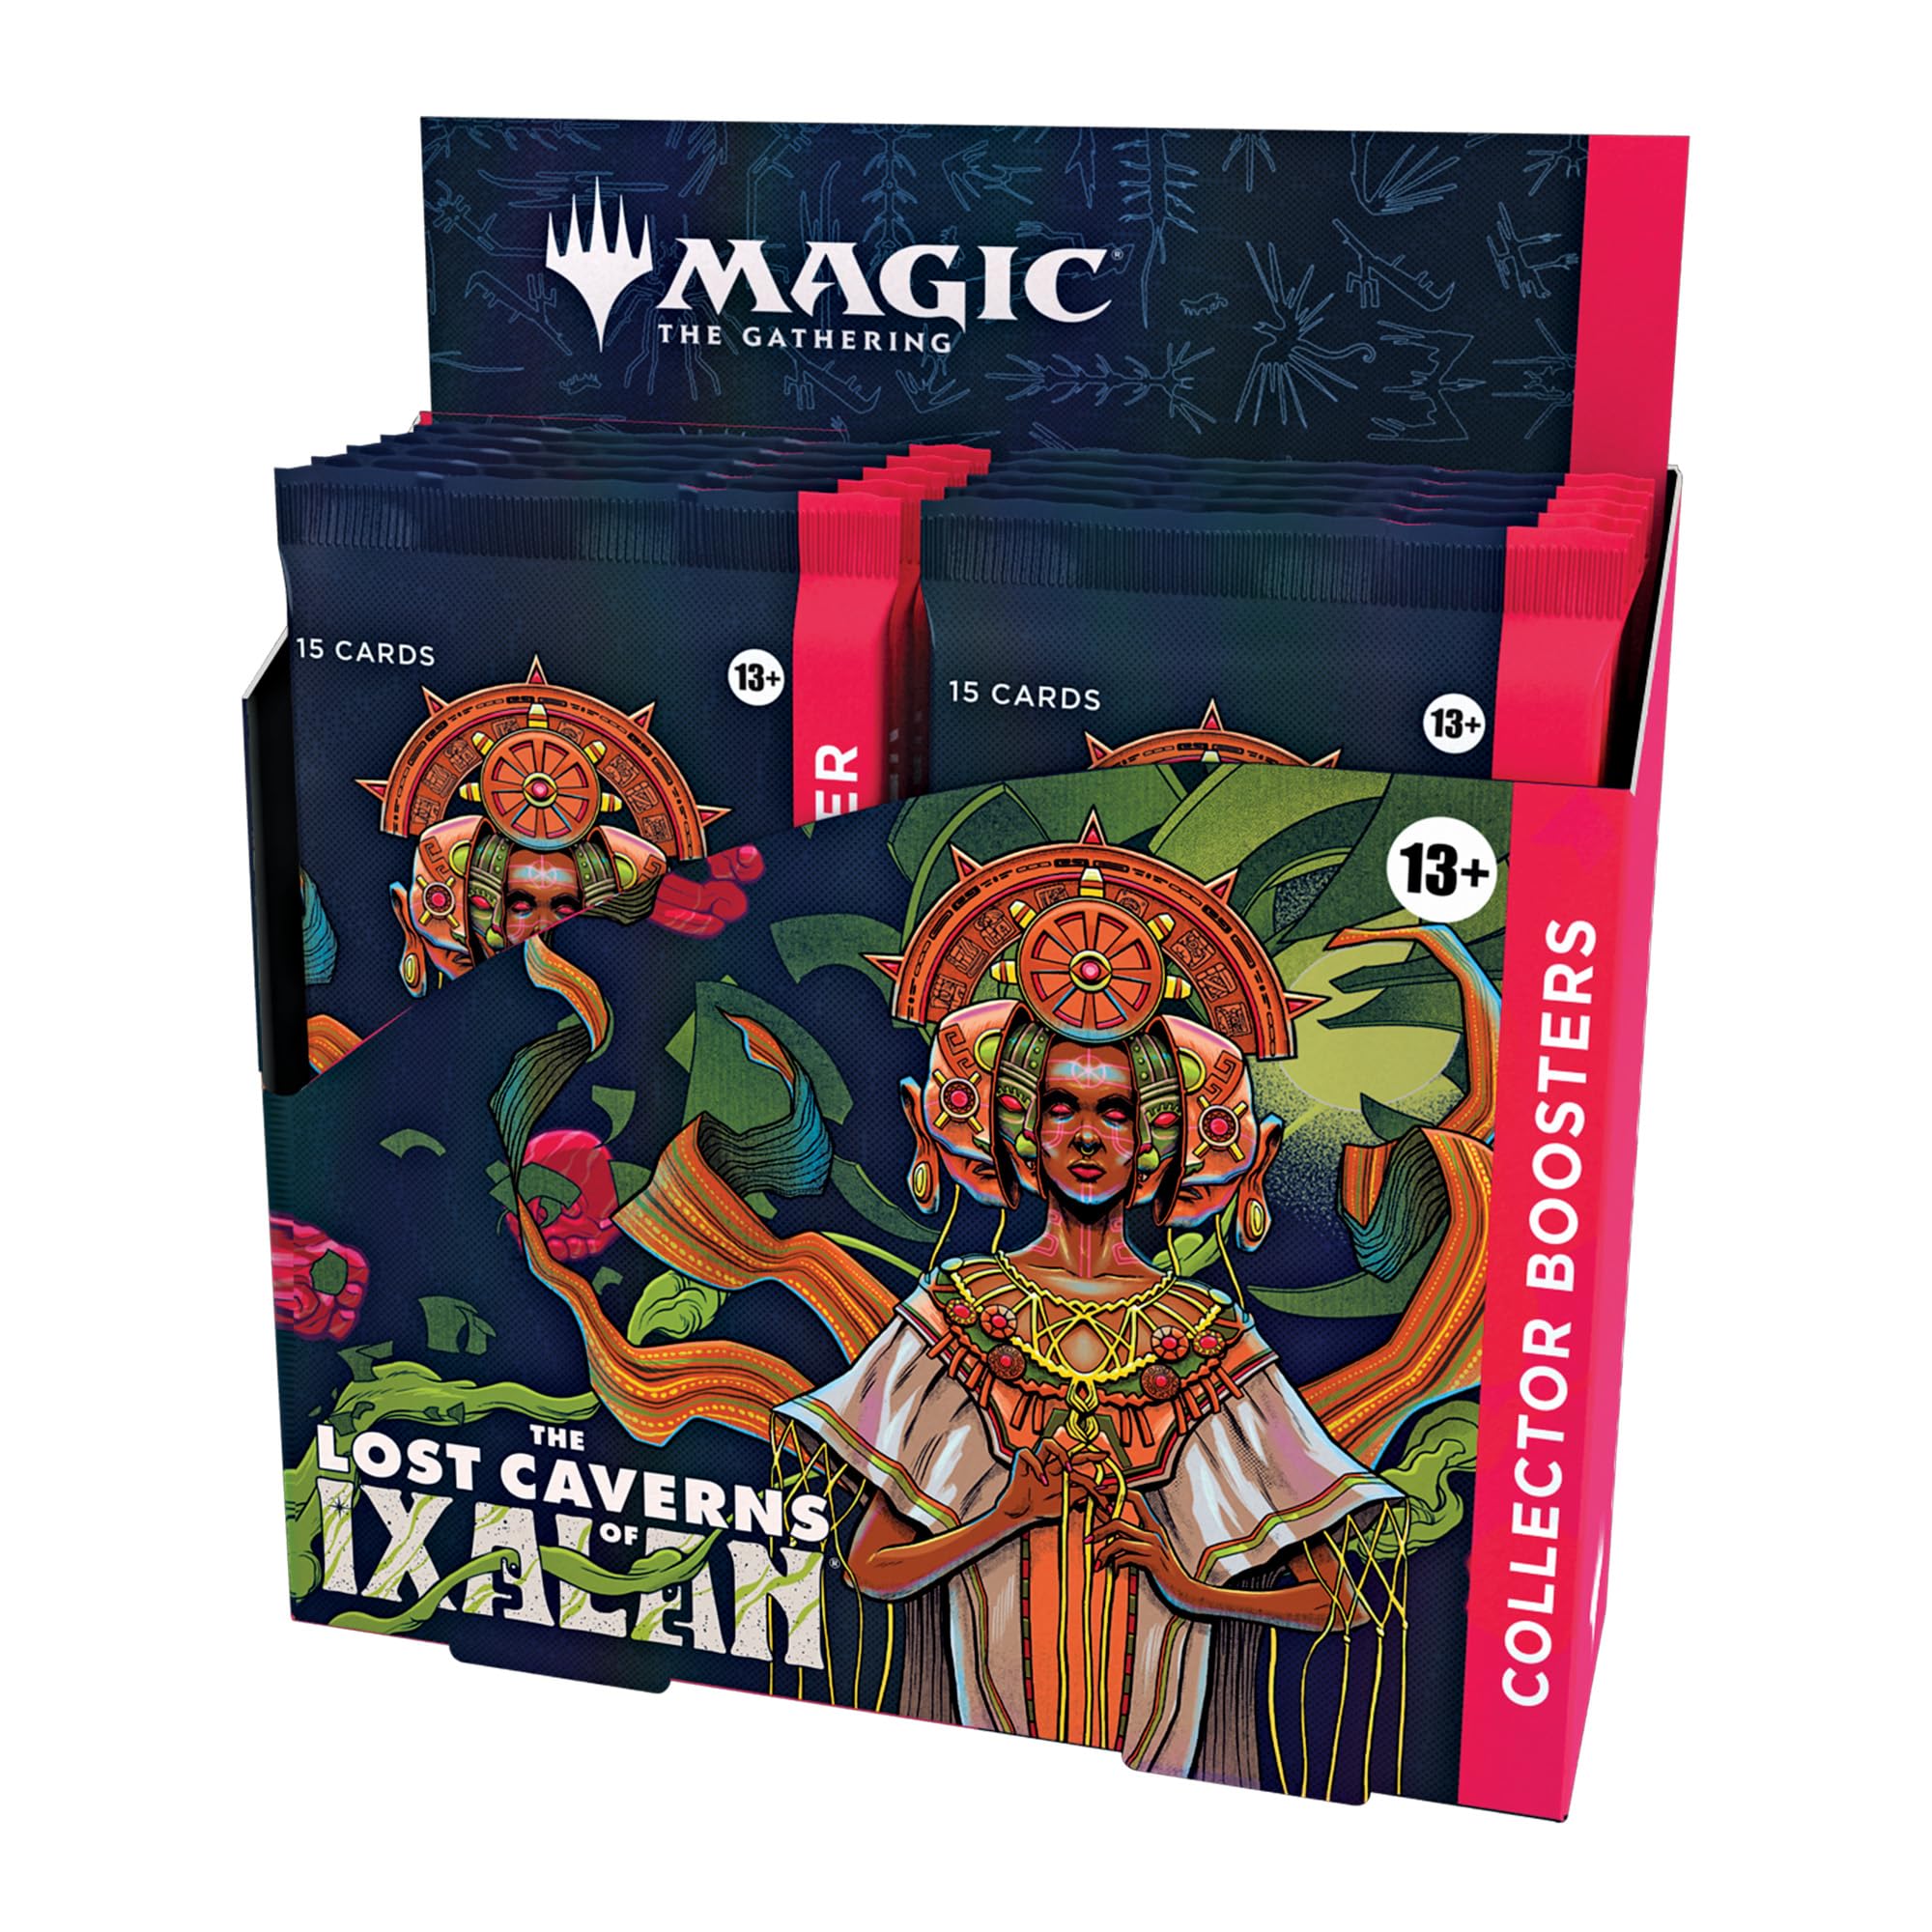 Magic: The Gathering The Lost Caverns of Ixalan Collector Booster Box - 12 Packs + 1 Foil Box Topper Card (181 Magic Cards)